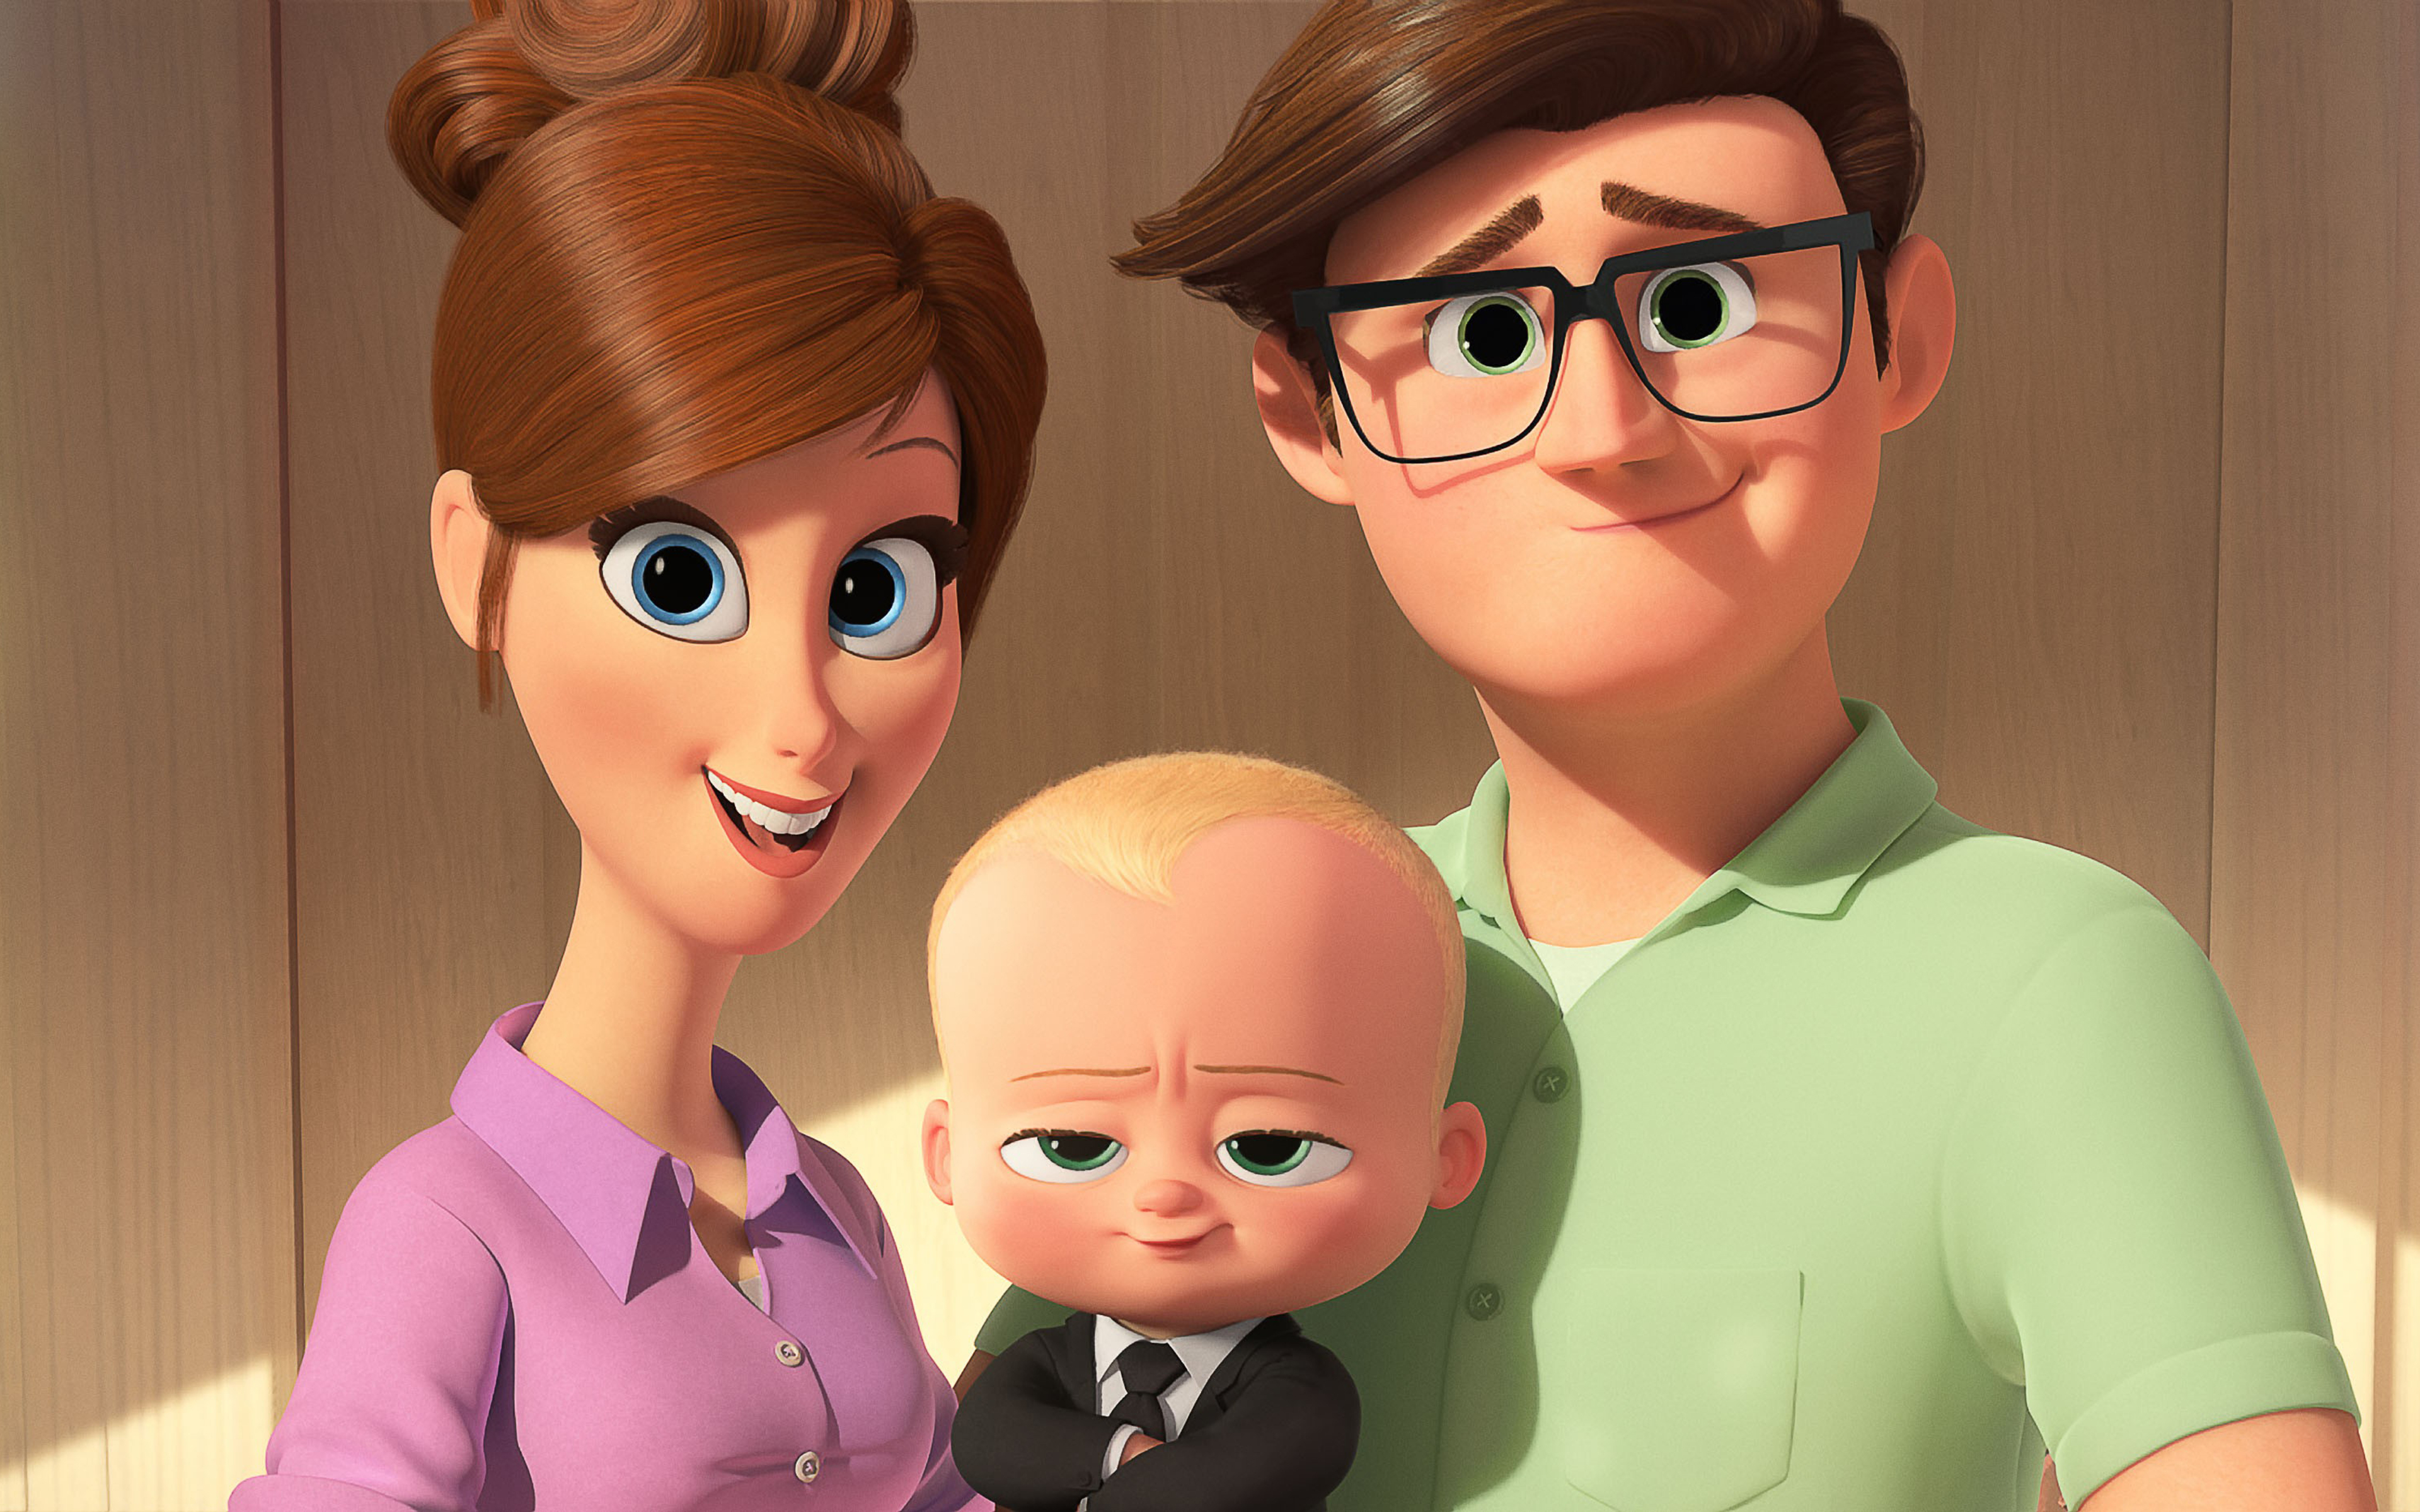 3840x2400 2017 The Boss Baby 4k HD 4k Wallpapers, Images ...